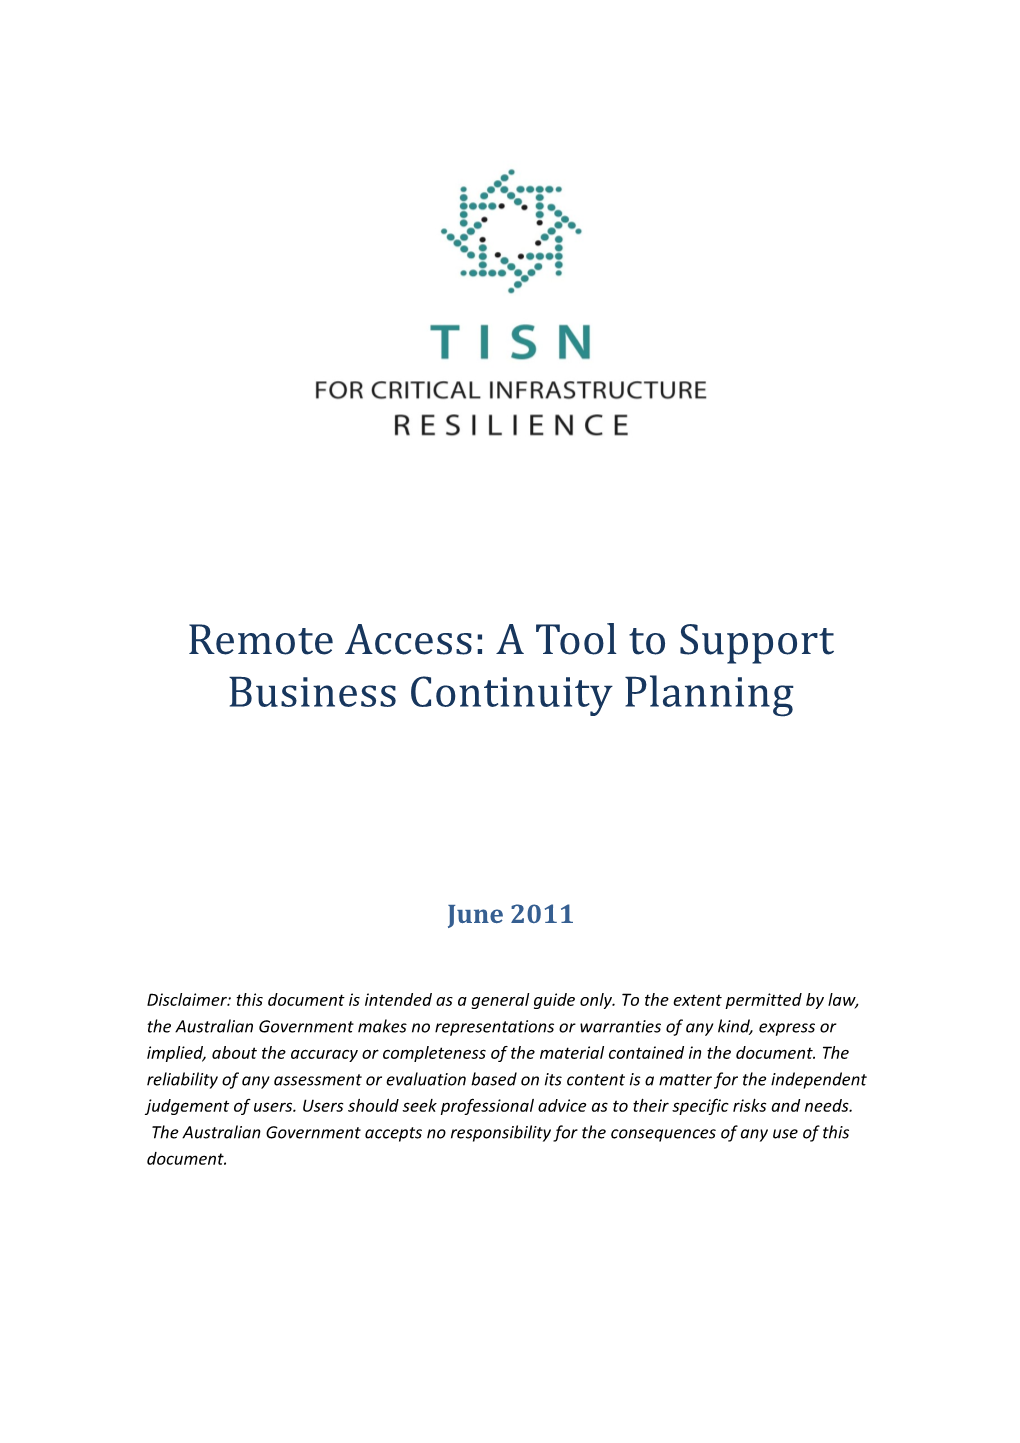 Remote Access a Tool to Support Business Continuity